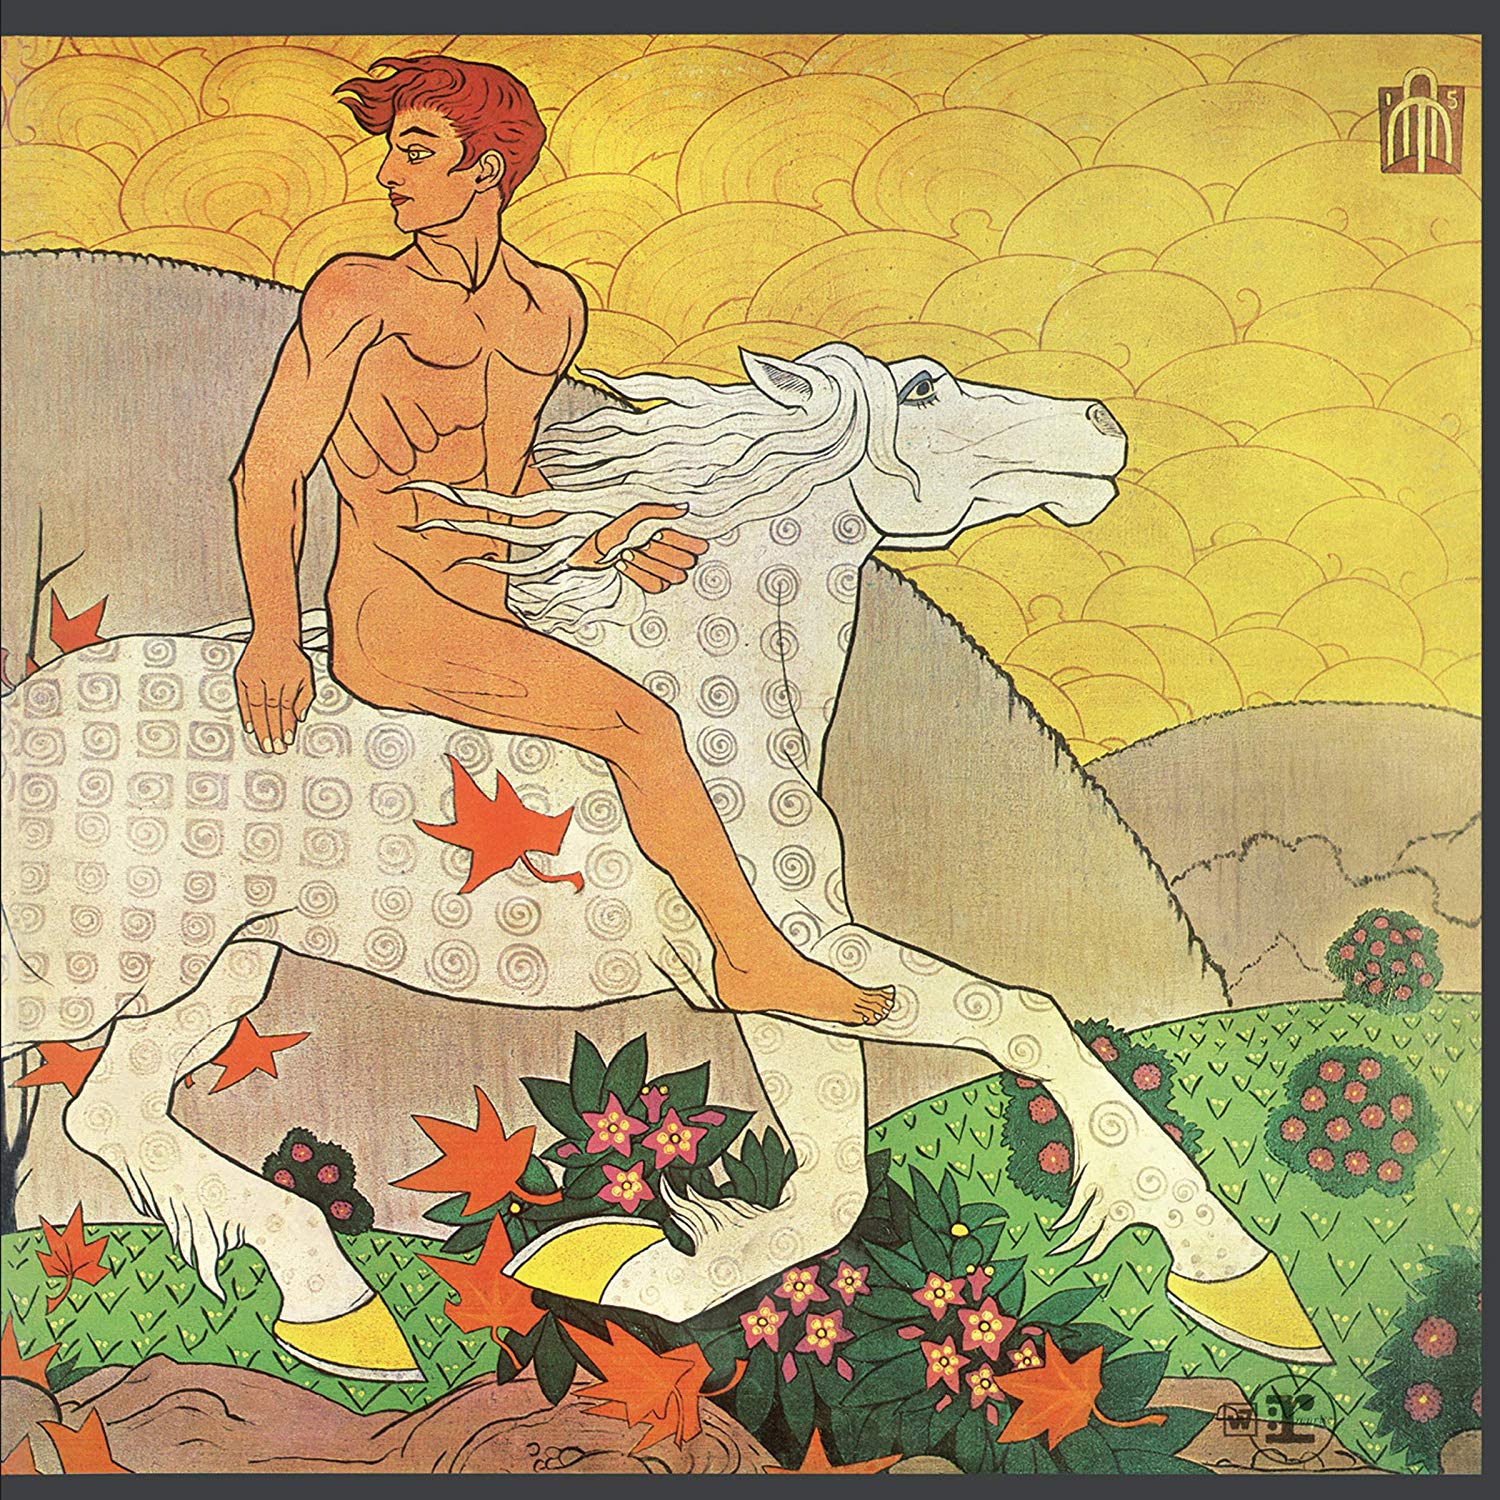 Fleetwood Mac – Then Play On (Expanded Edition / Remastered) (1969/2013/2018) [FLAC 24bit/96kHz]